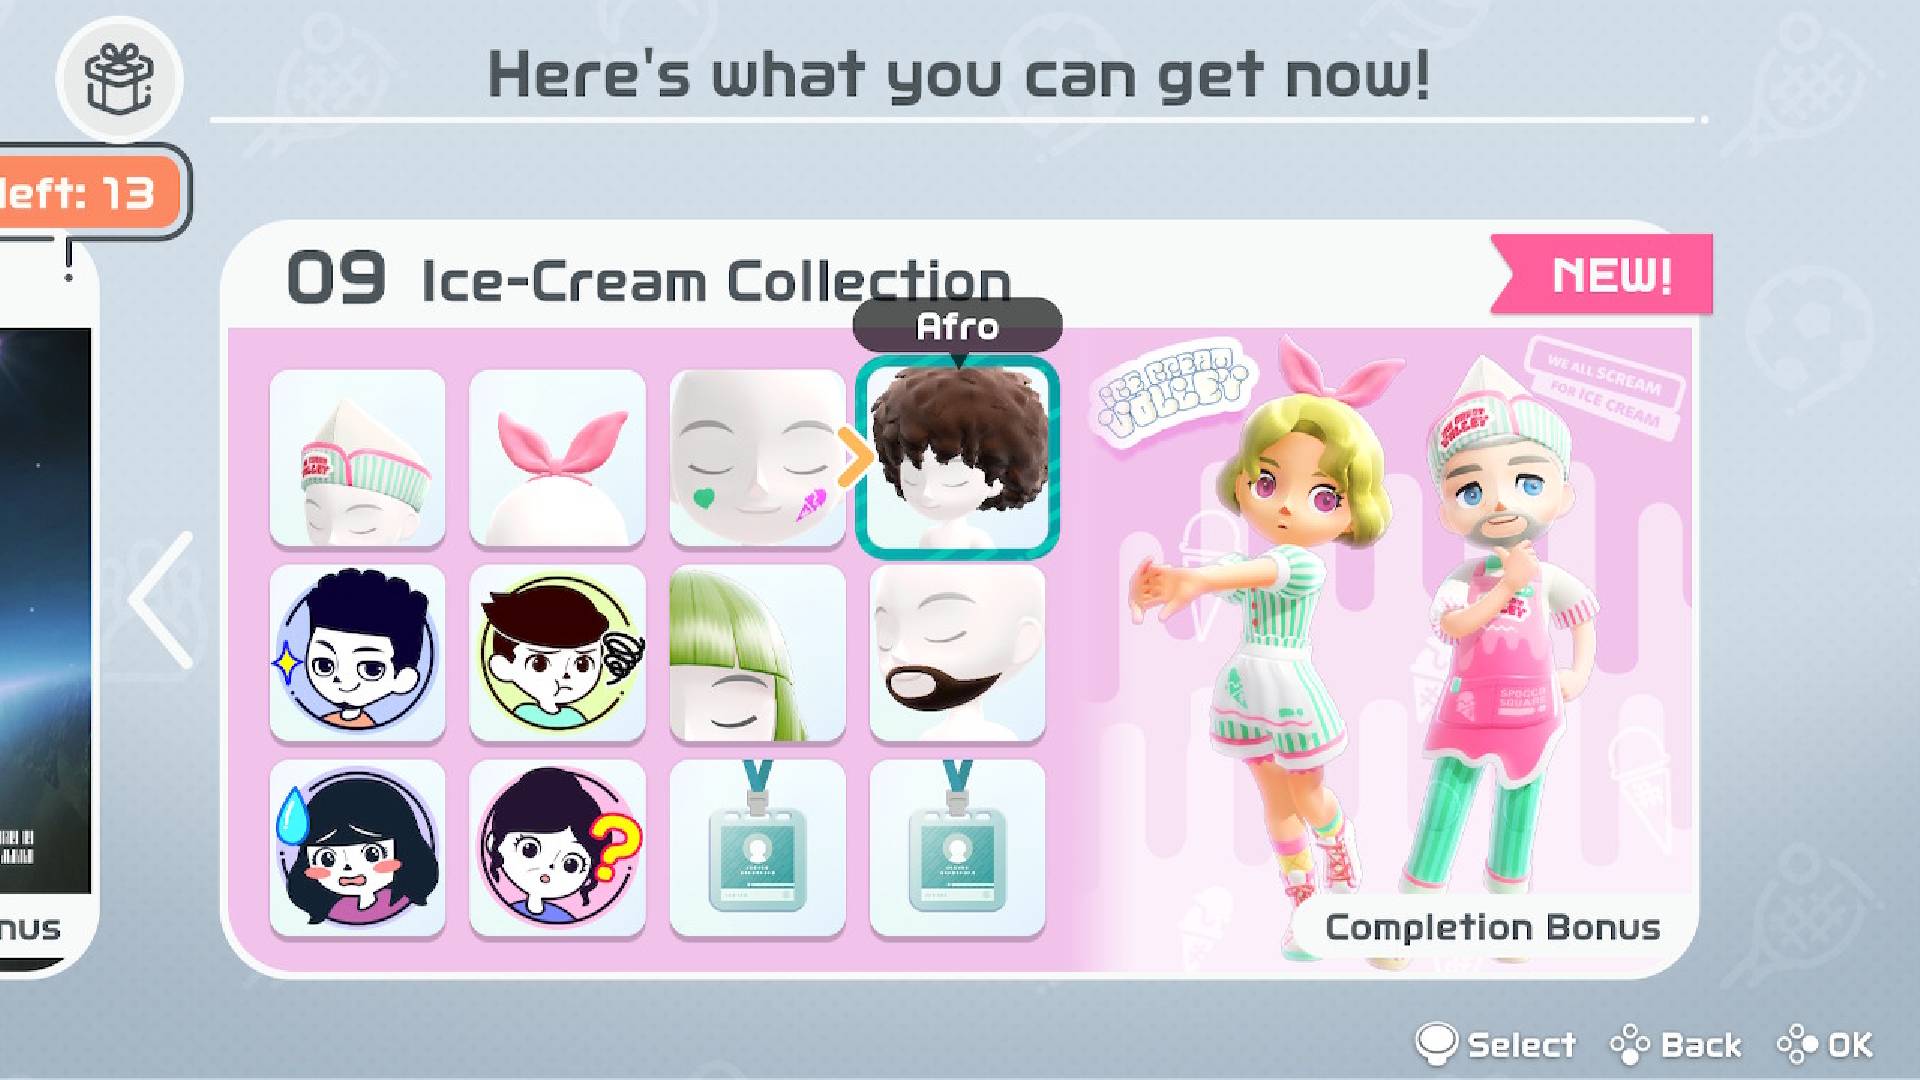 Nintendo Switch Sports Cosmetics: A menu screens shows many different outfits and icons, some of them based off of the theme of 'Ice-Cream'